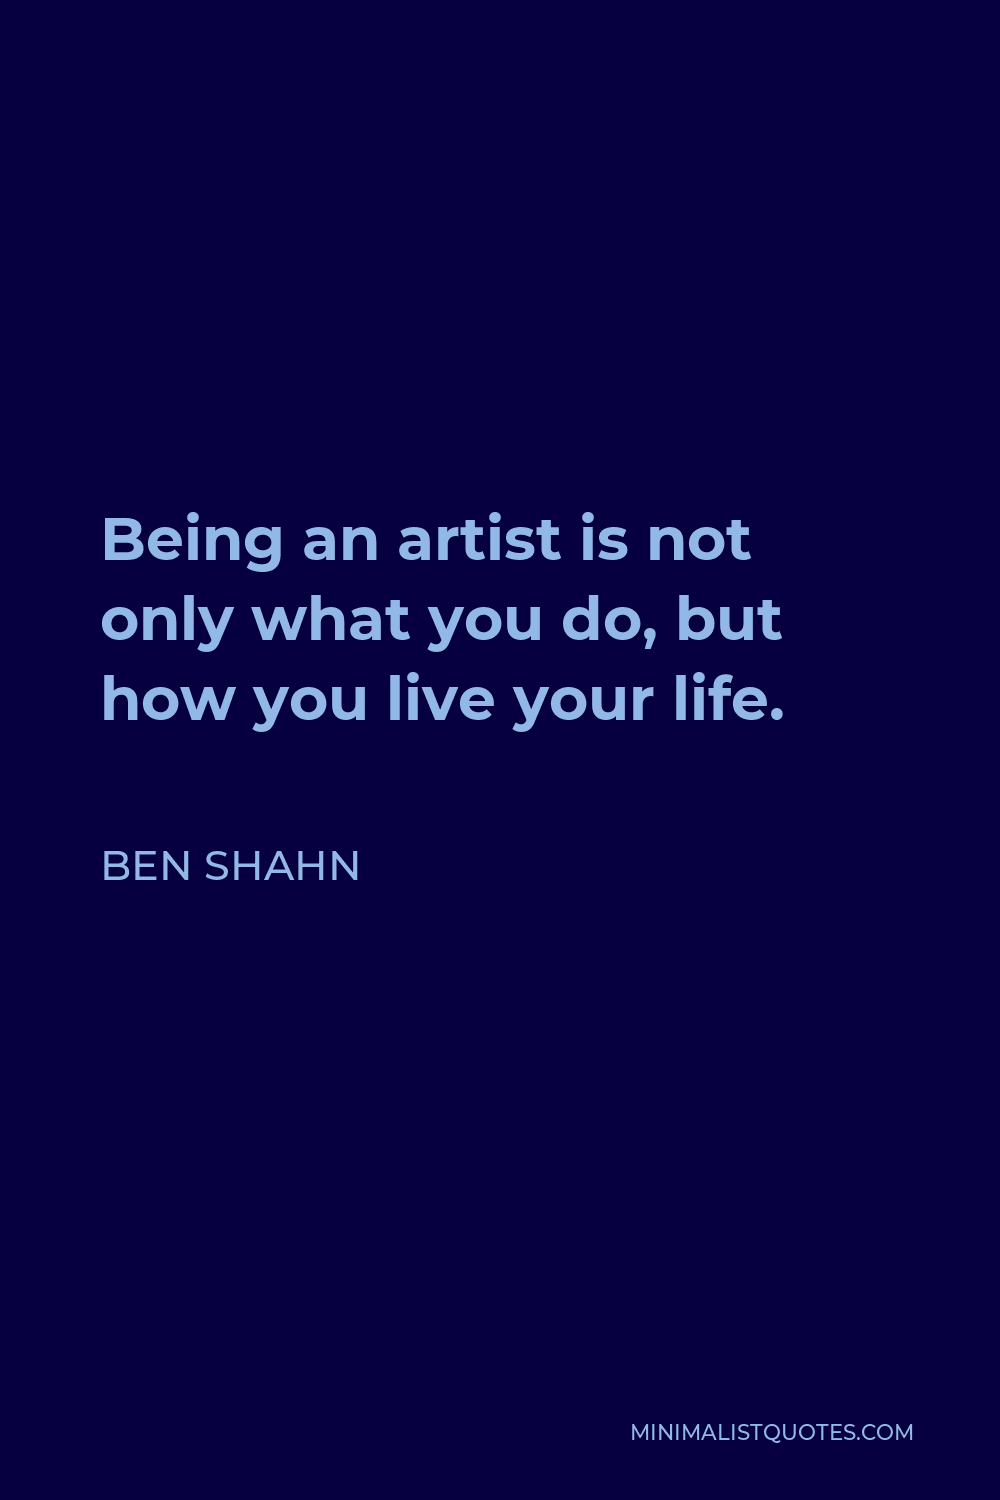 Ben Shahn Quote - Being an artist is not only what you do, but how you live your life.